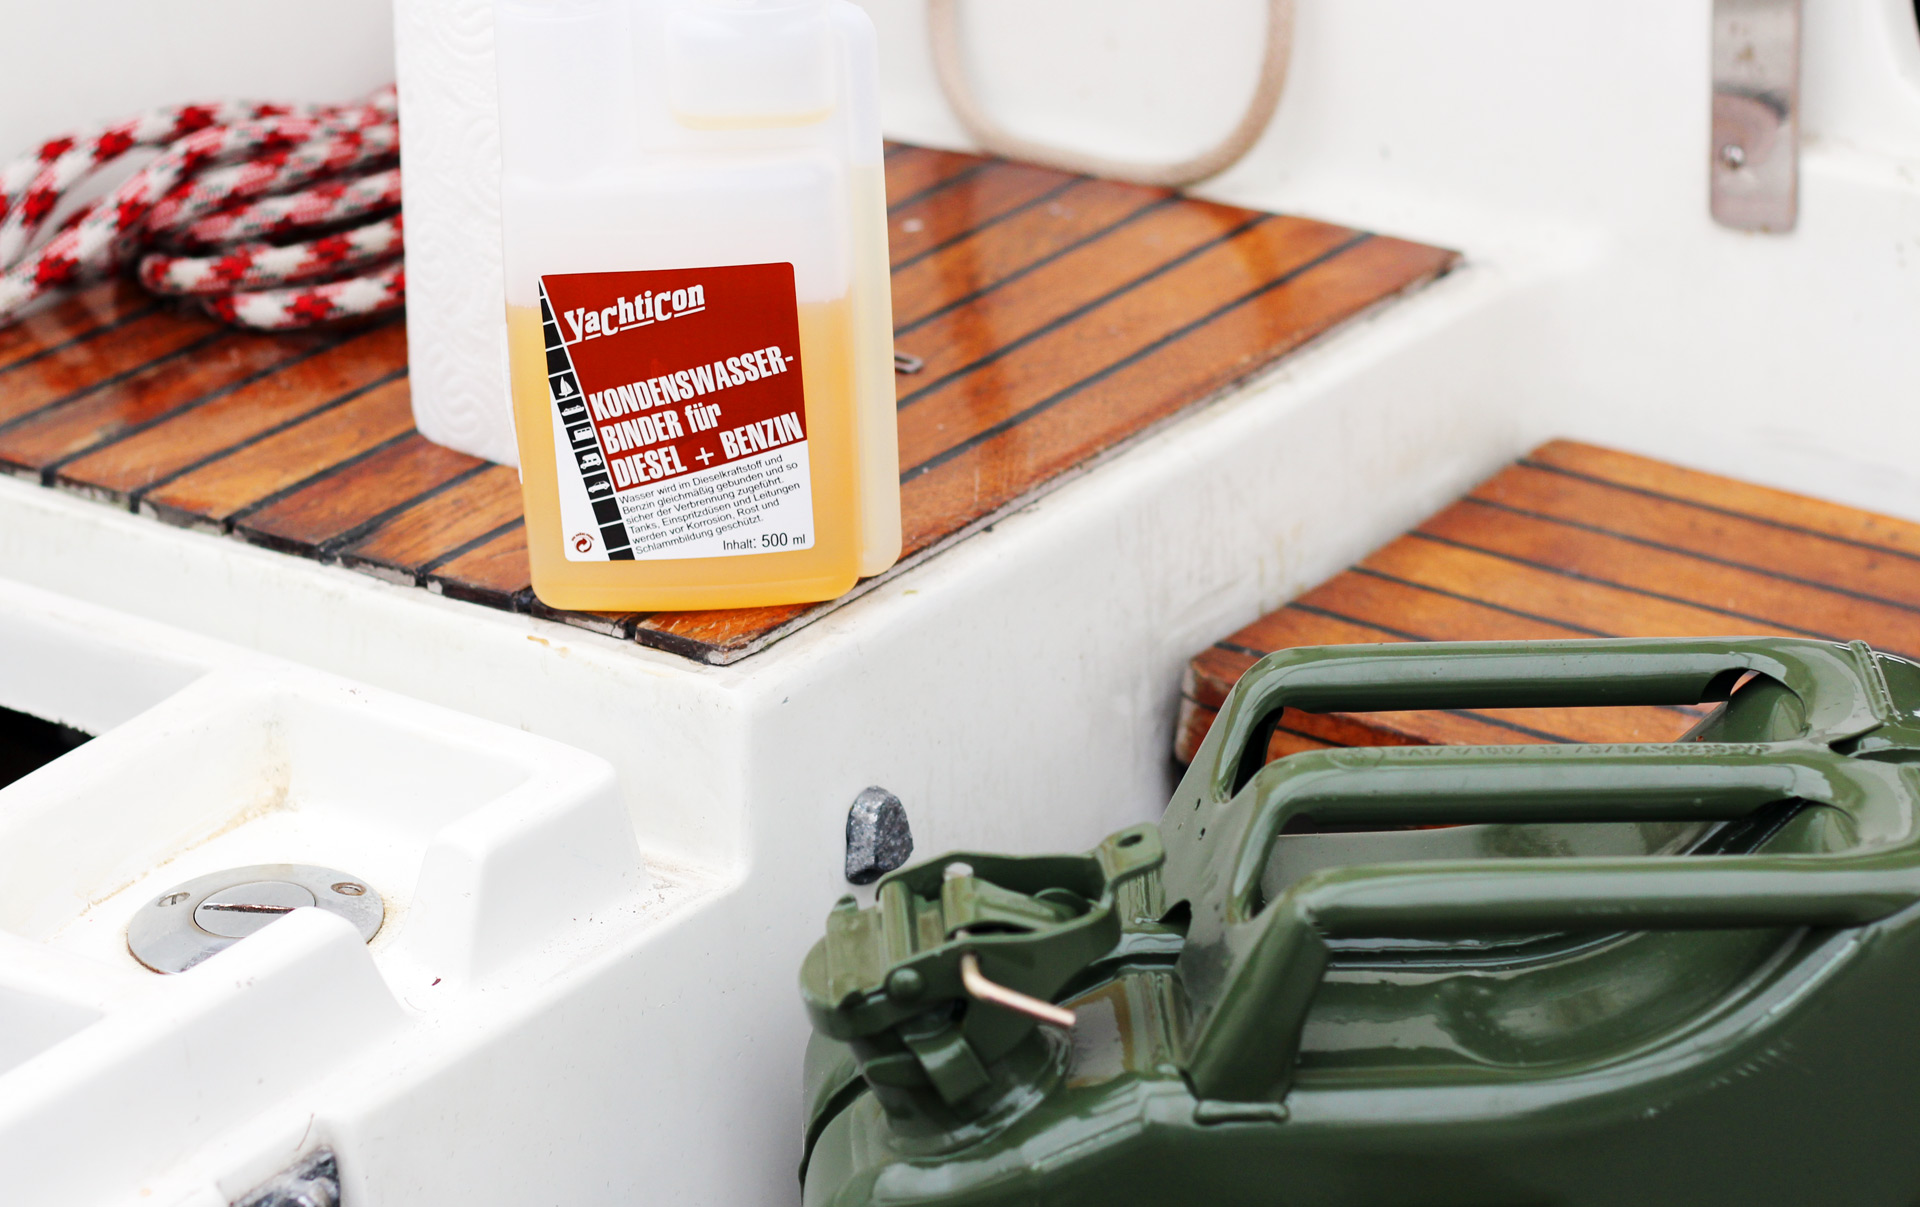 Keep your tank full - and protect the Diesel against condensation.